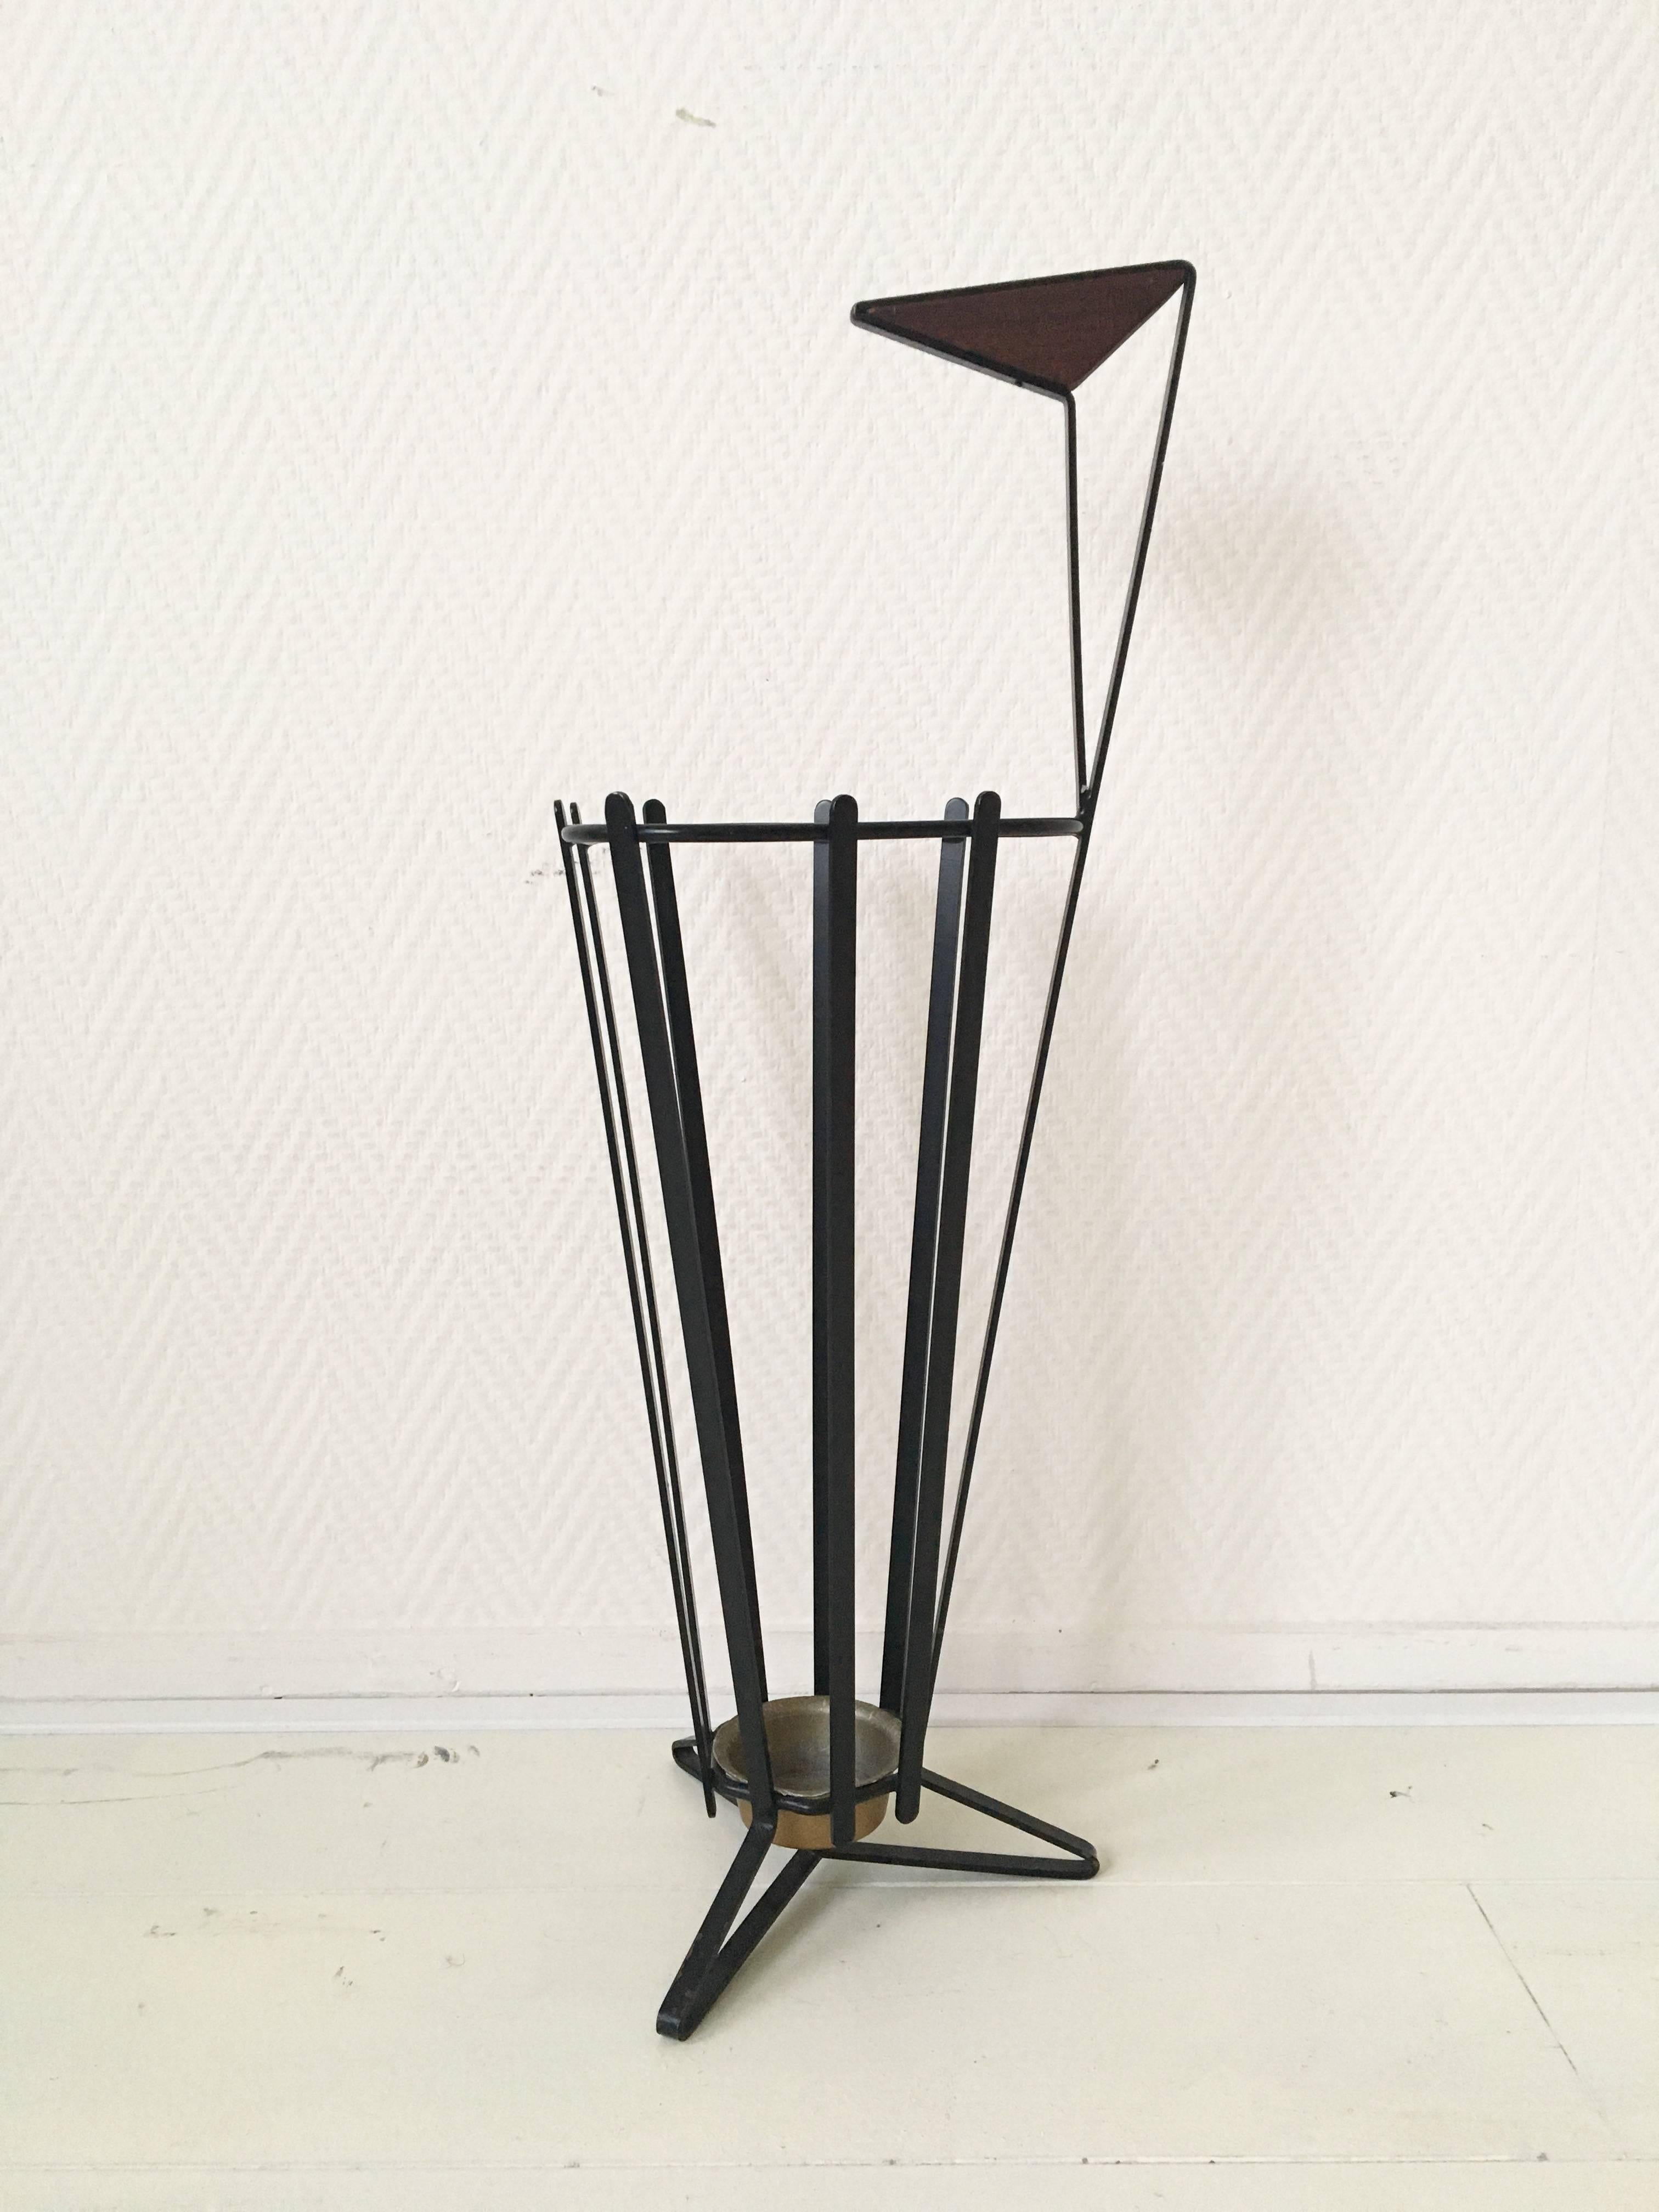 This wonderful European umbrella stand features a black metal base and a handle finished with Teak detail. It's style resembles designs of Mategot. Complete and original stand which remains in very good condition. Some normal wear consistent with